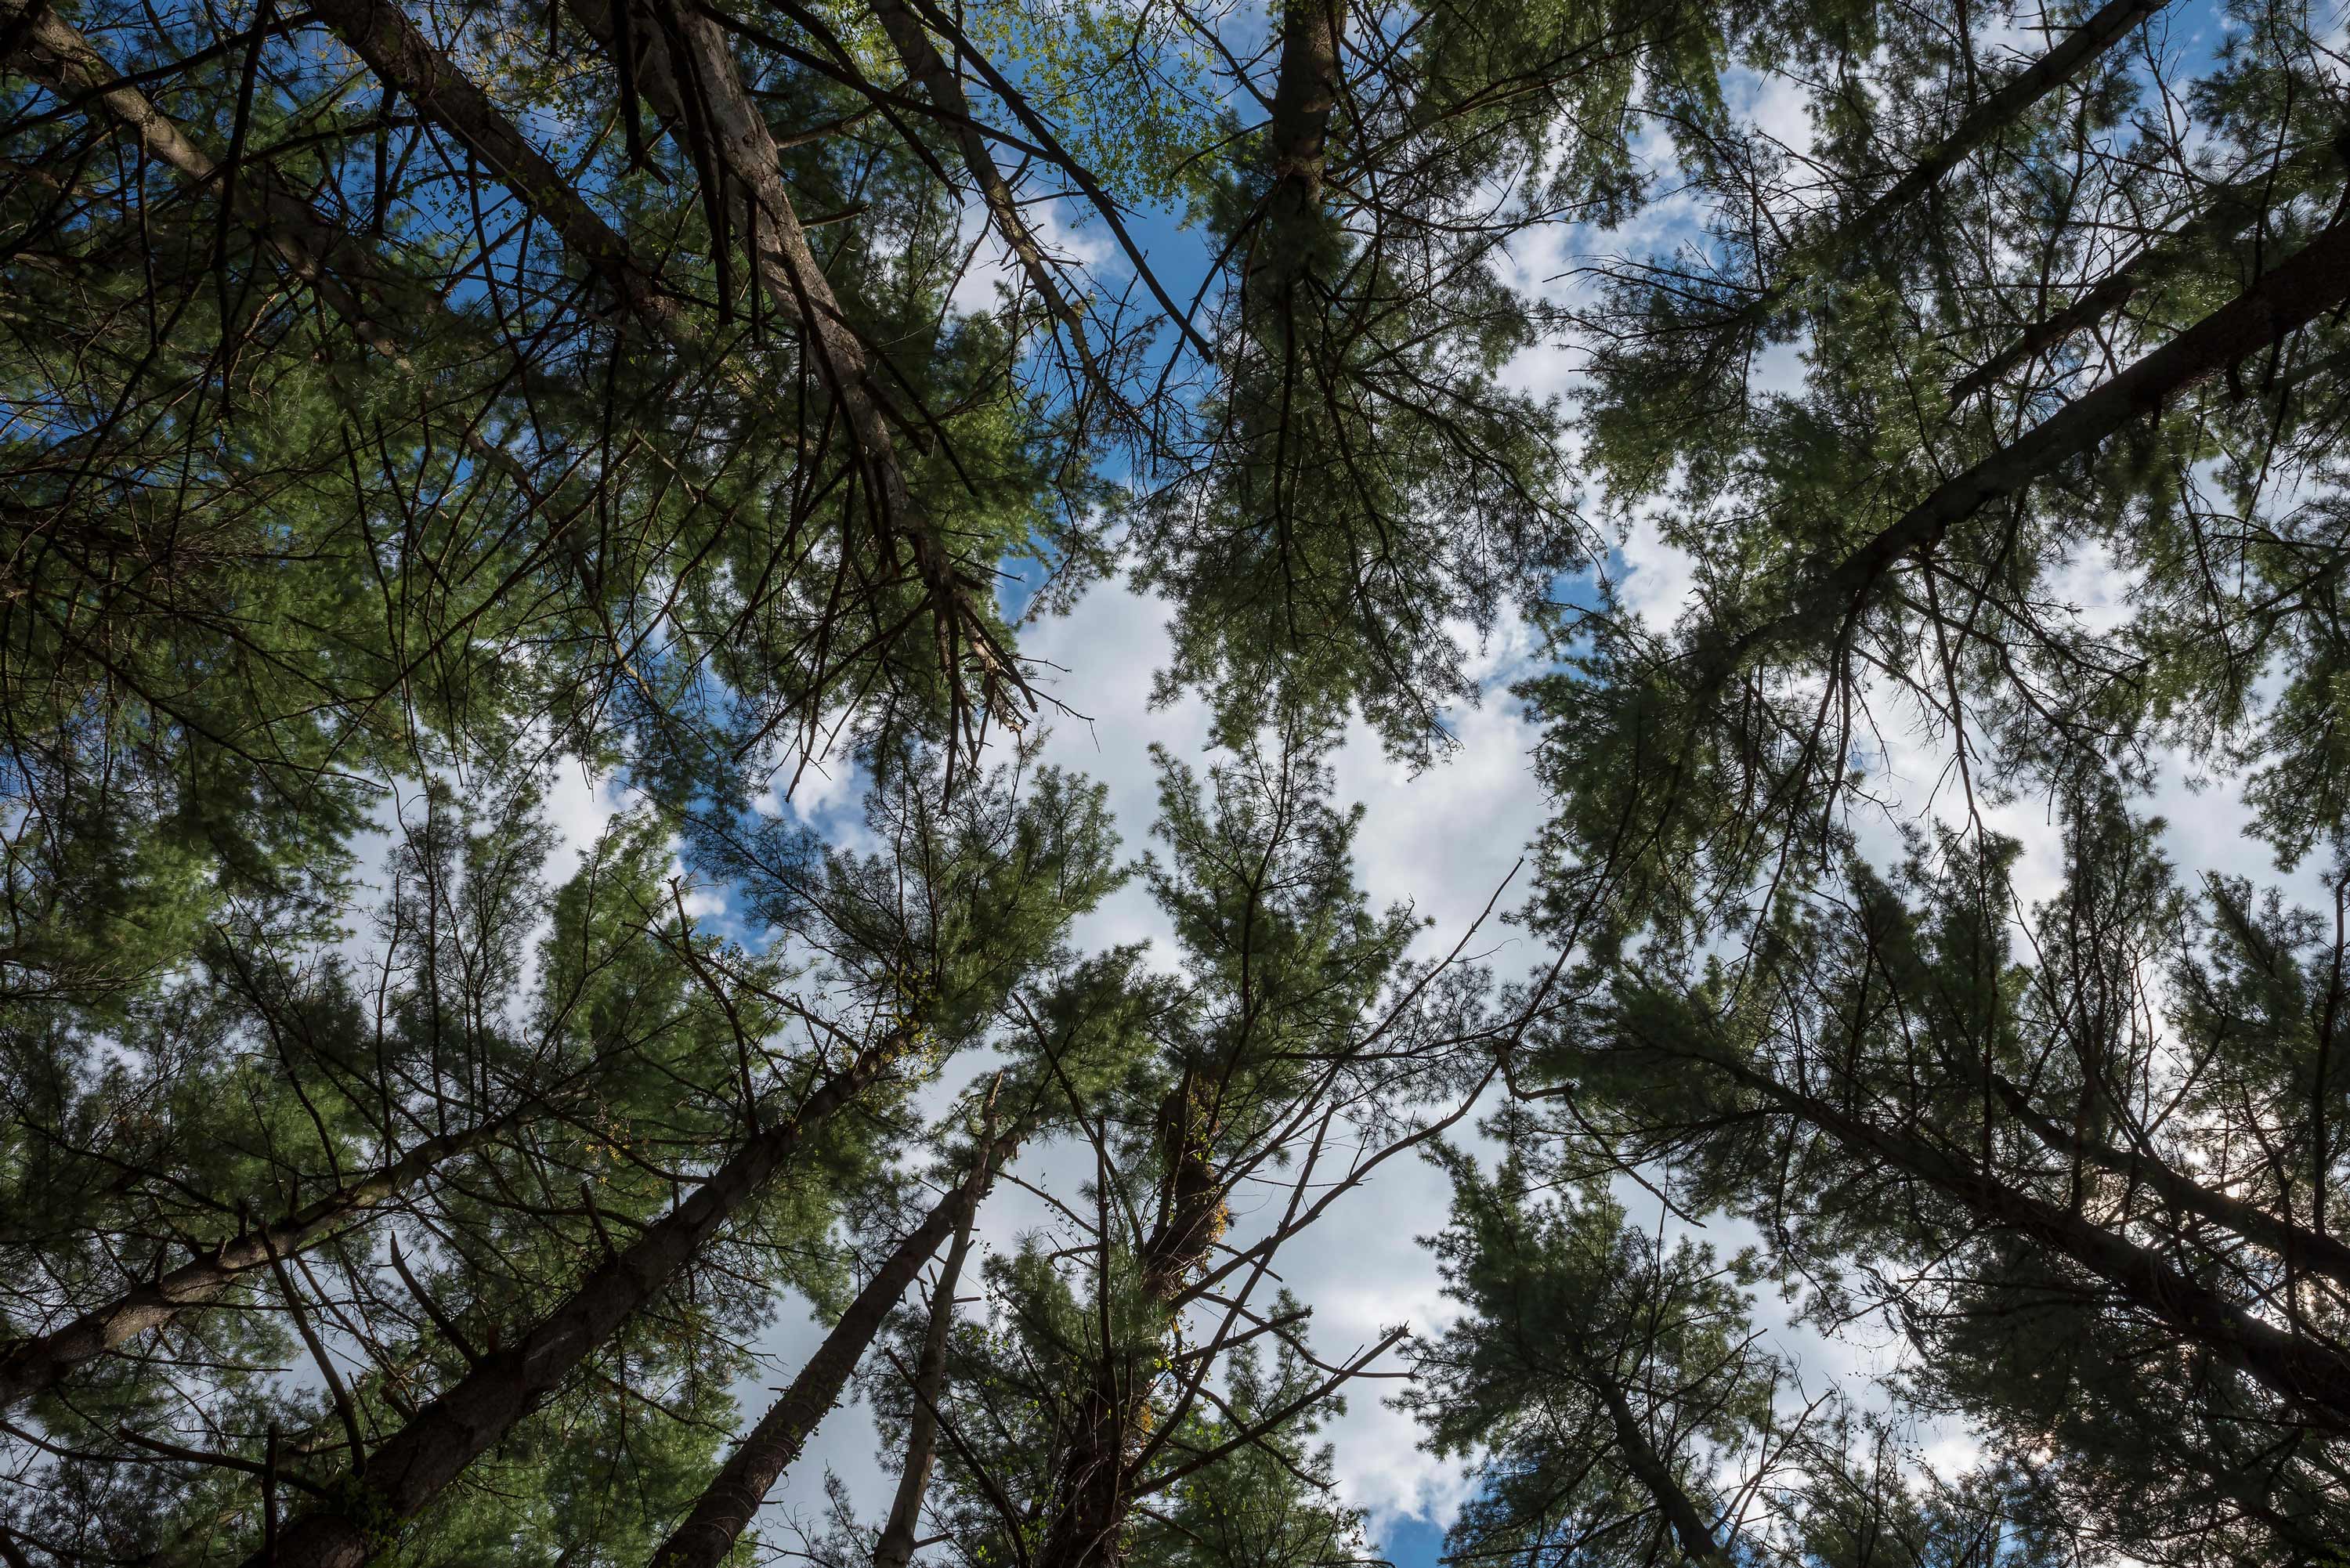 Looking up at the tree canopy at Thorn Creek Woods.